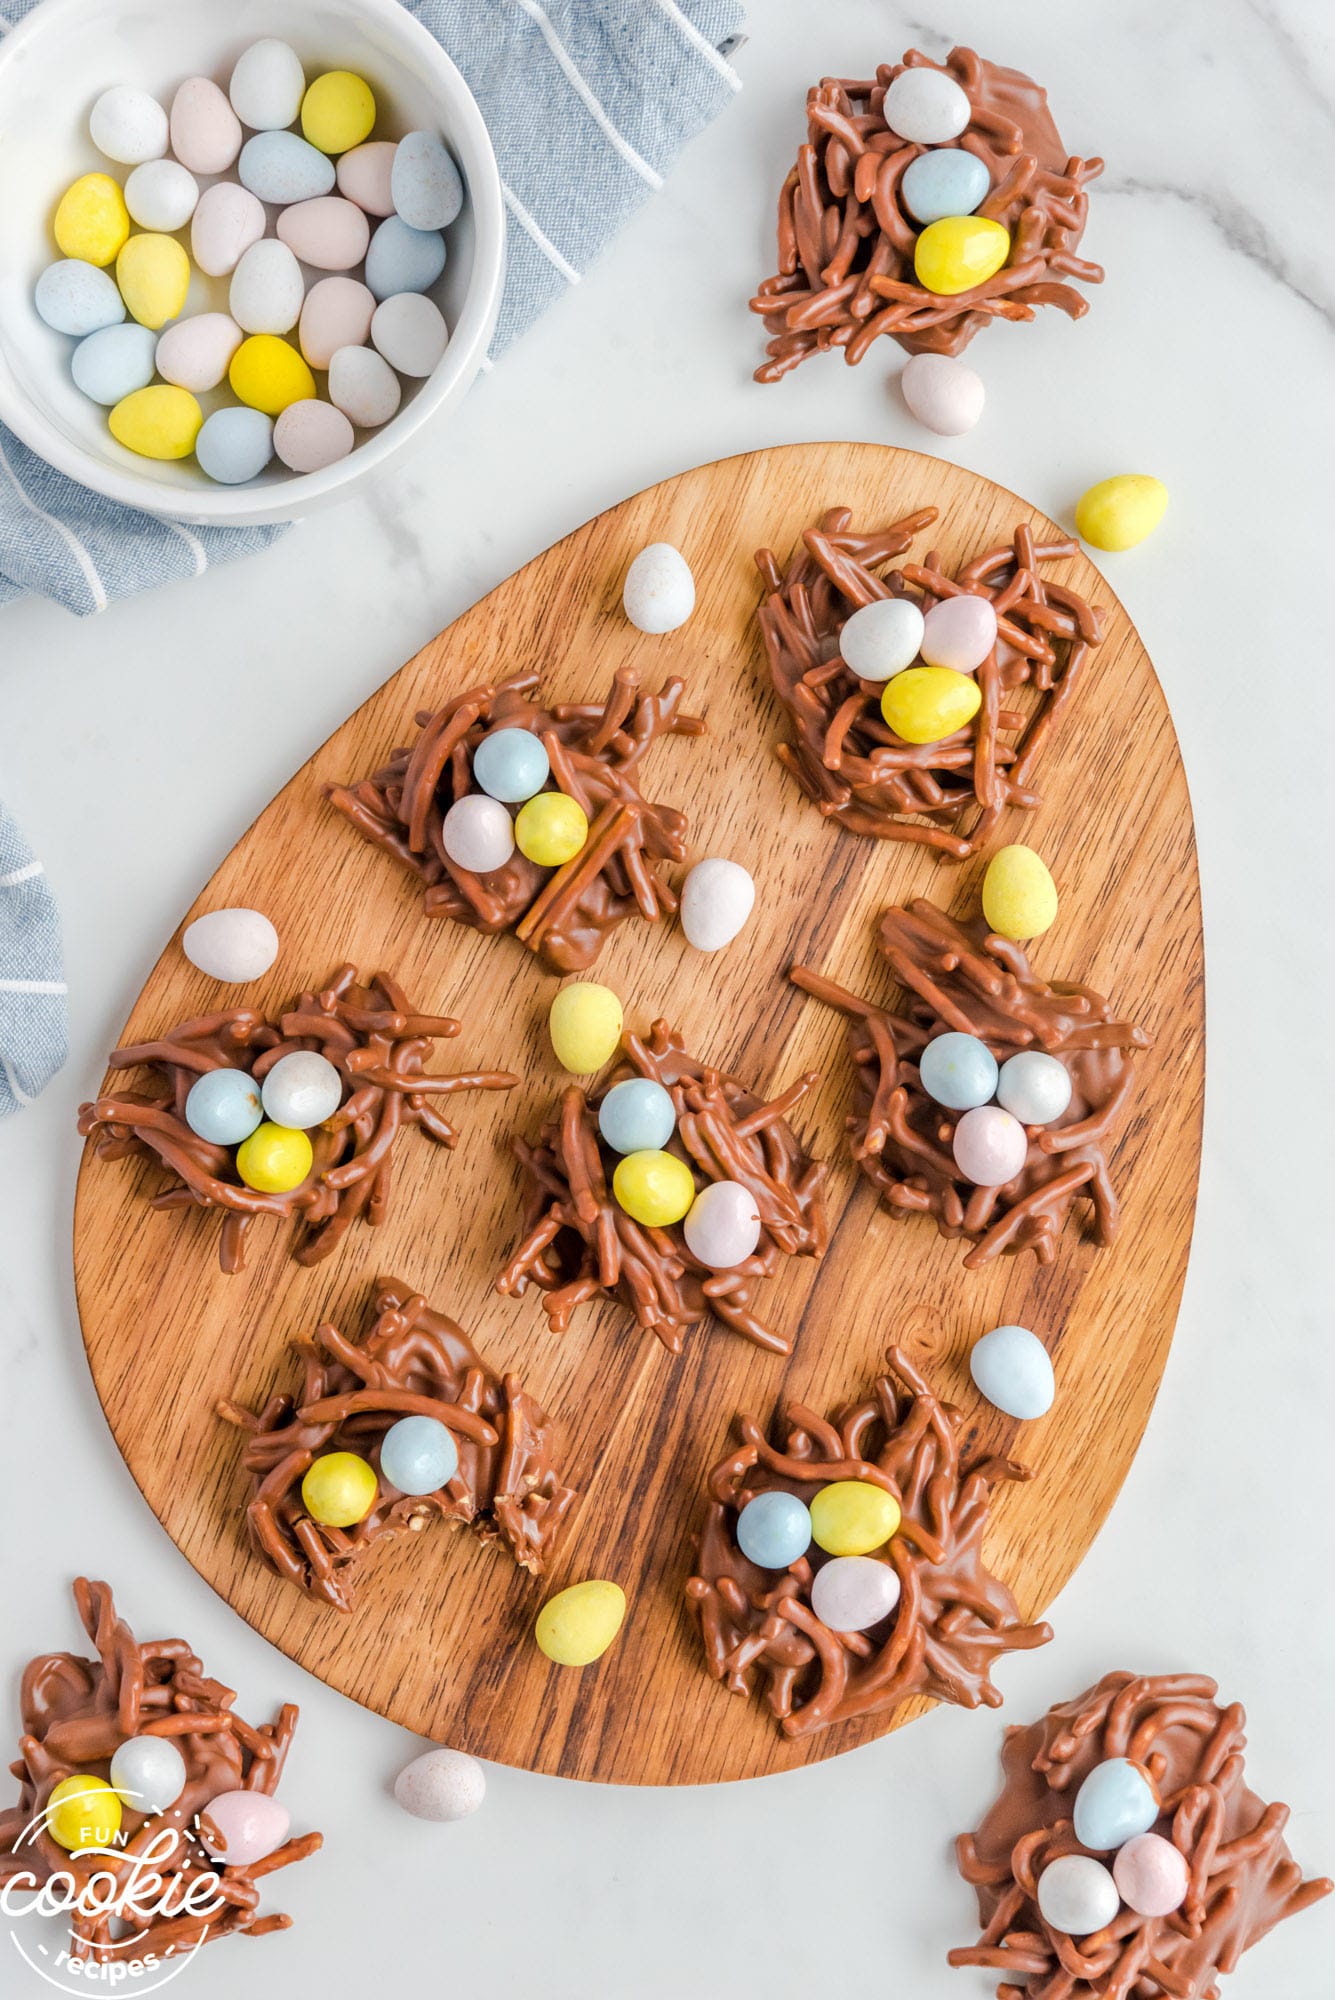 Birds nest cookies on an easter egg shaped wooden board.